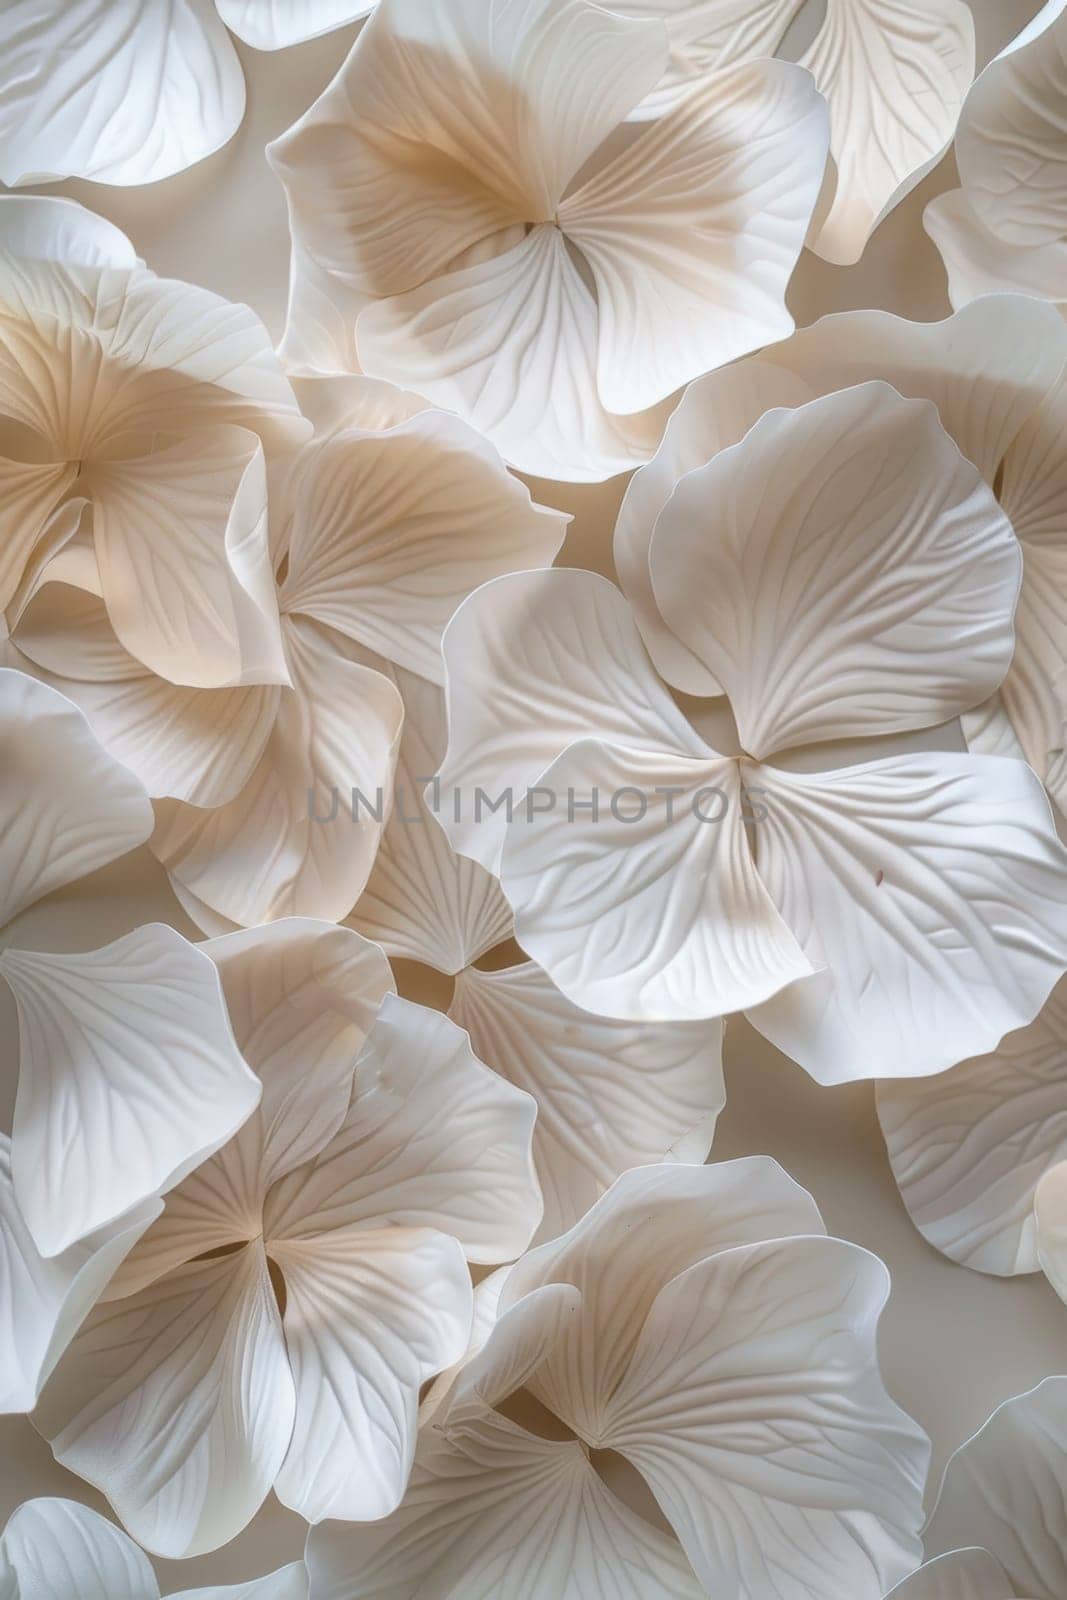 Abstract floral pattern of petals. Delicate background colors of flower petals.